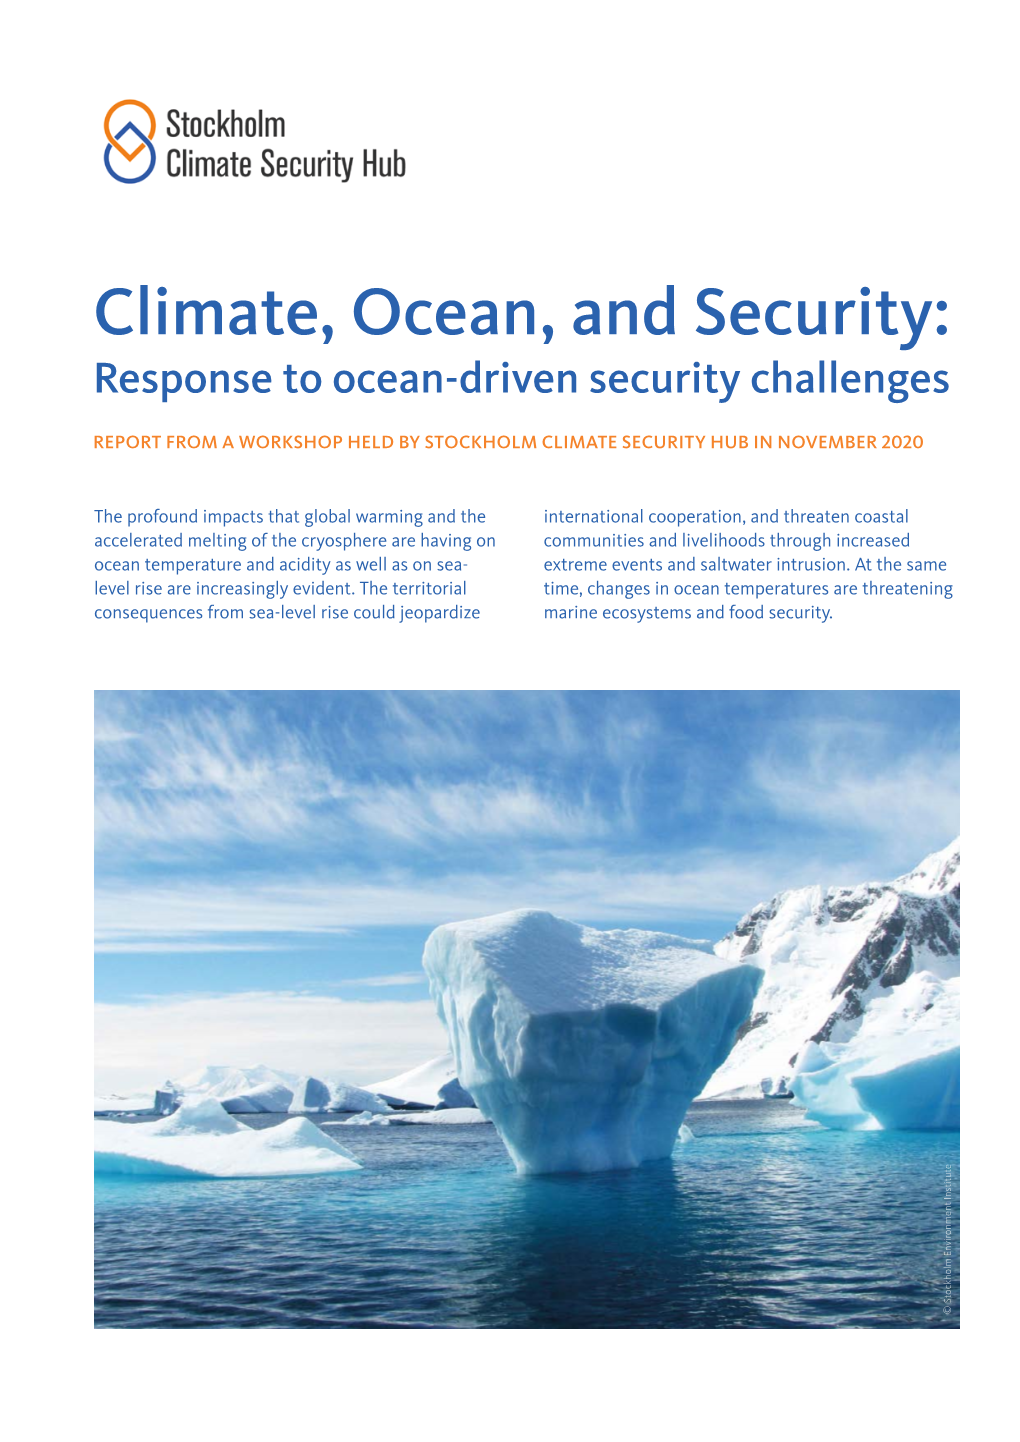 Climate, Ocean, and Security: Response to Ocean-Driven Security Challenges